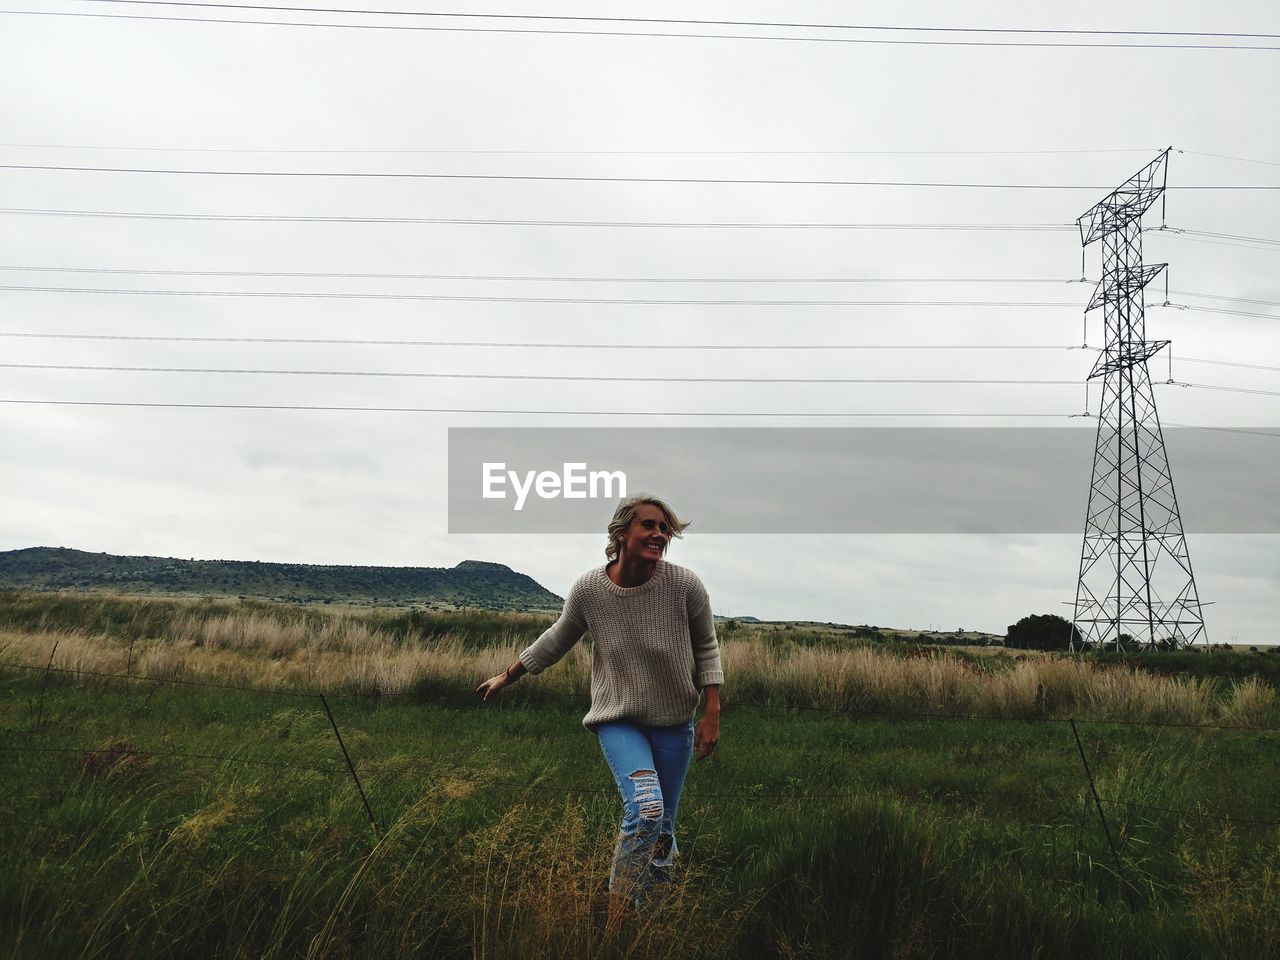 Smiling woman standing on field against electricity pylon